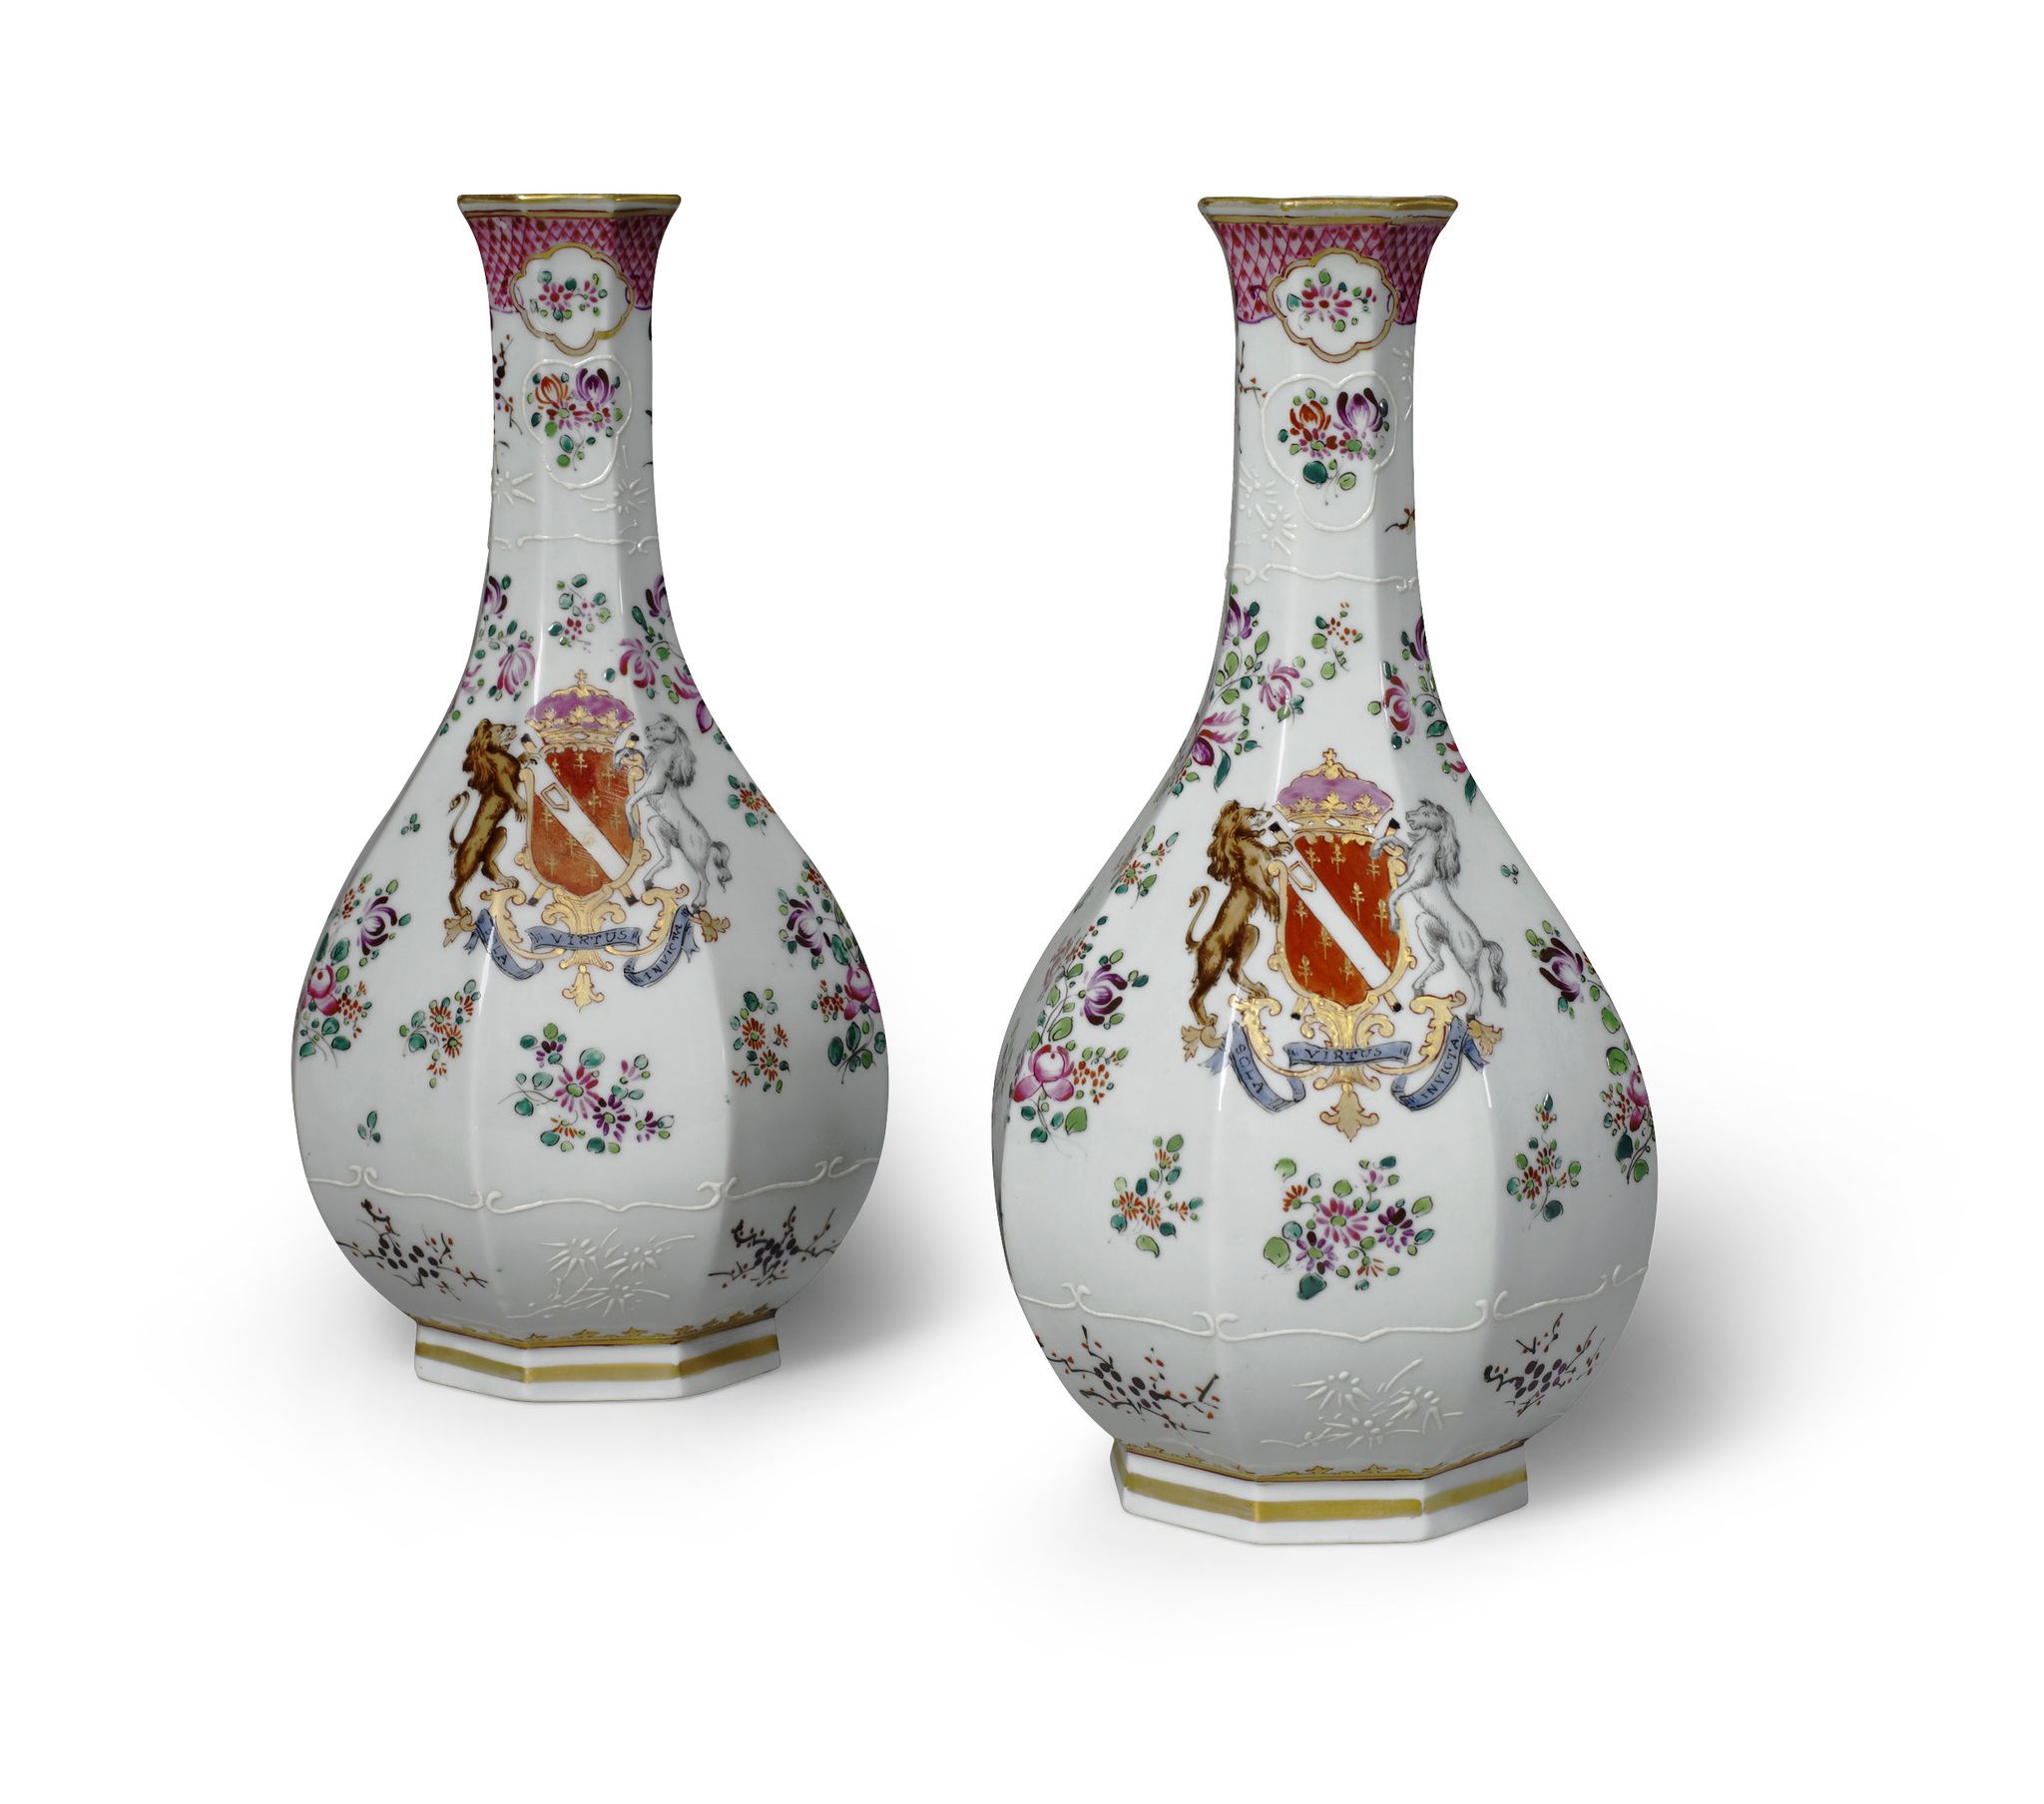 A Pair of 19th Century French Samson Porcelain Vases France circa 1800, bearing coar of arms with